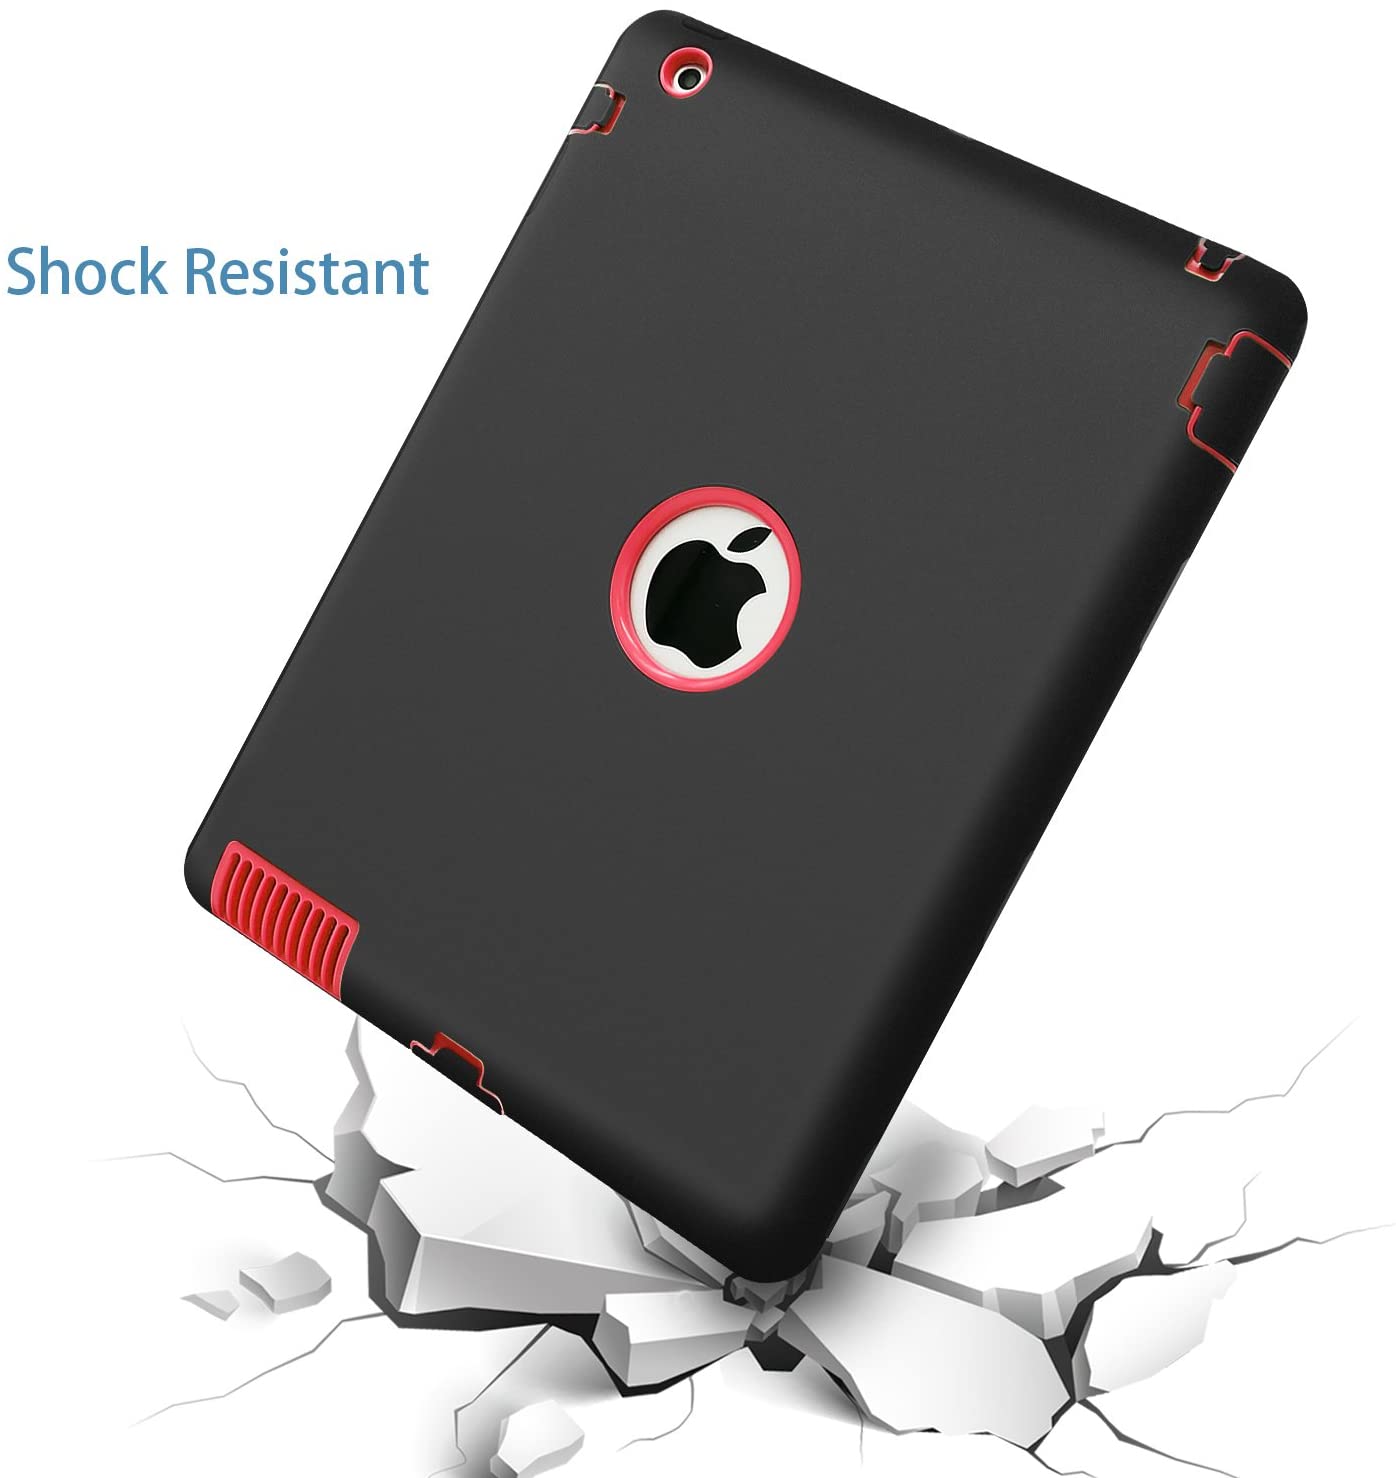 Fingic Heavy Duty 3 Layer Armor High-Impact Rugged Shockproof Protective Case Cover for 9.7 iPad 2nd / 3rd / 4th Generation,Black/Red - e4cents